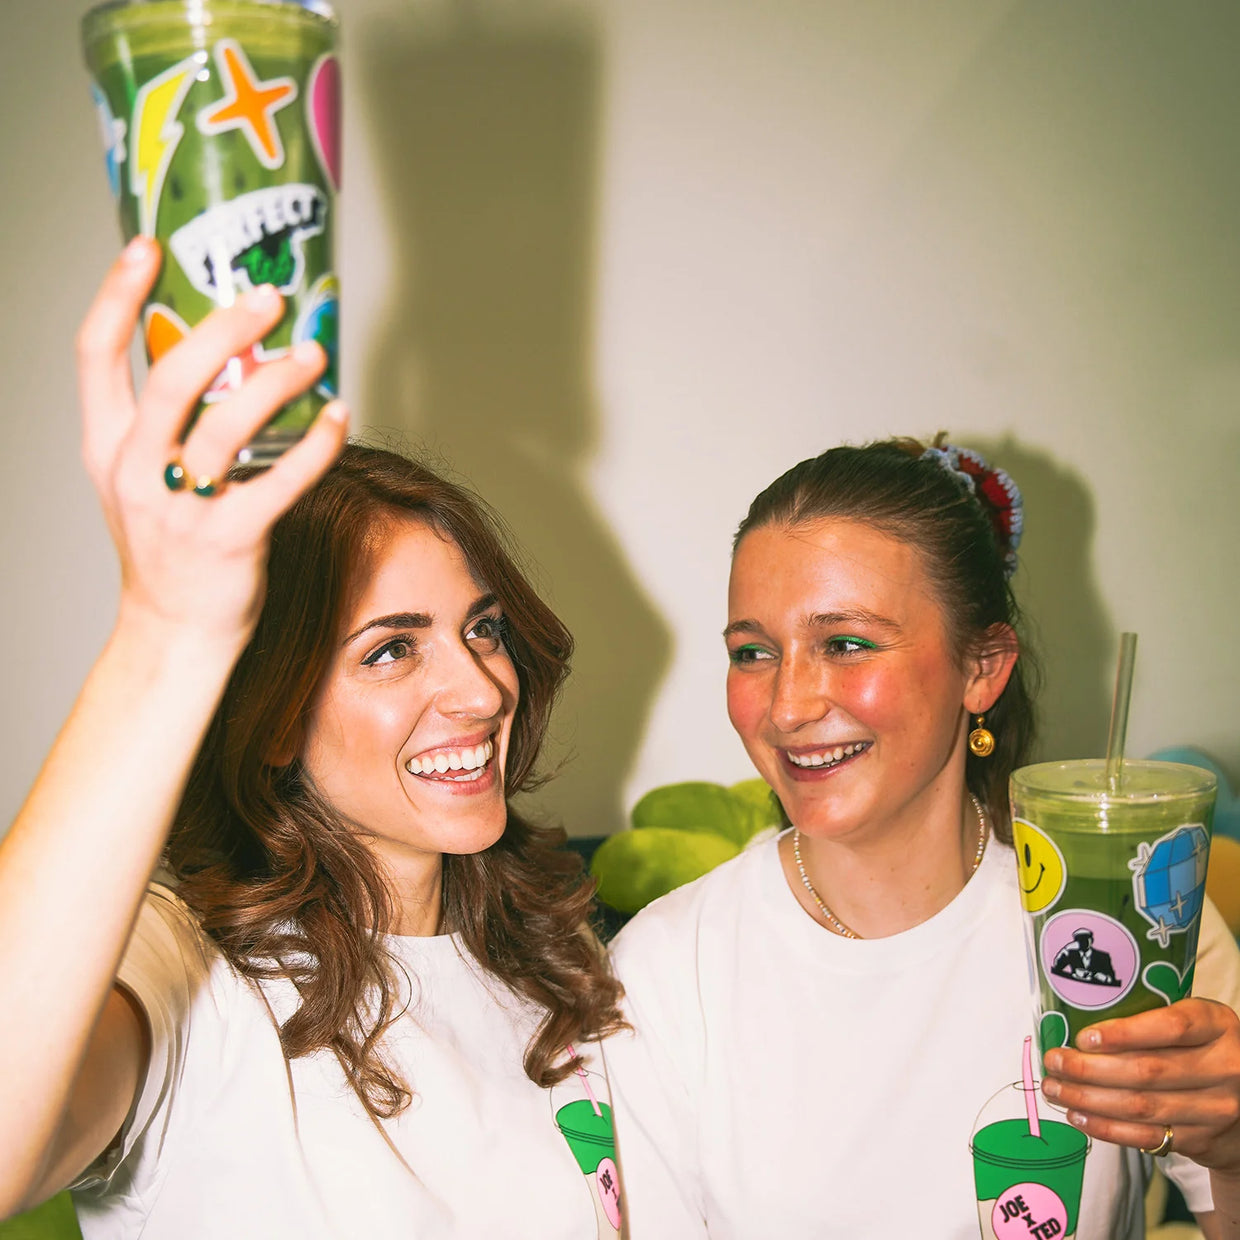 Shani and Romy drinking matcha lattes from the to-go cups